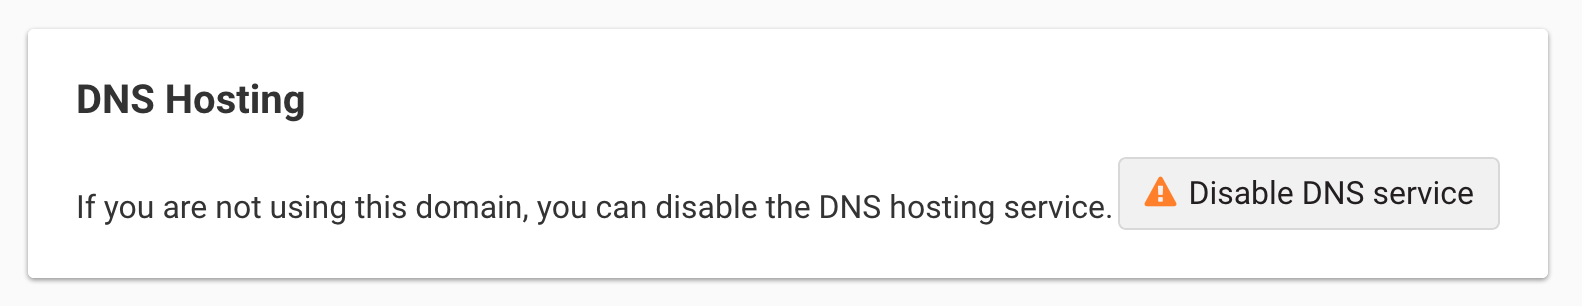 Disable DNS hosting